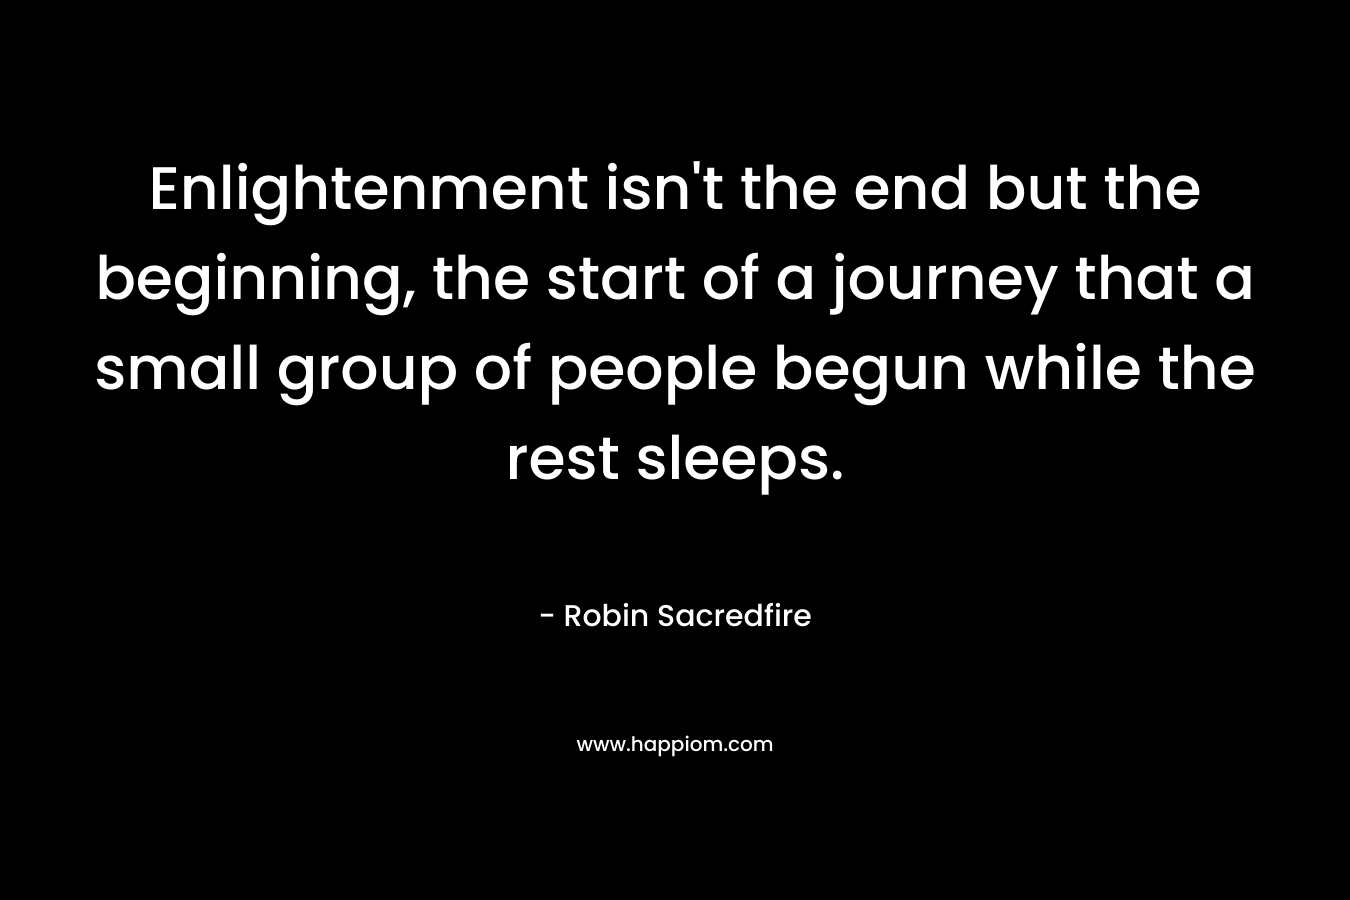 Enlightenment isn’t the end but the beginning, the start of a journey that a small group of people begun while the rest sleeps. – Robin Sacredfire